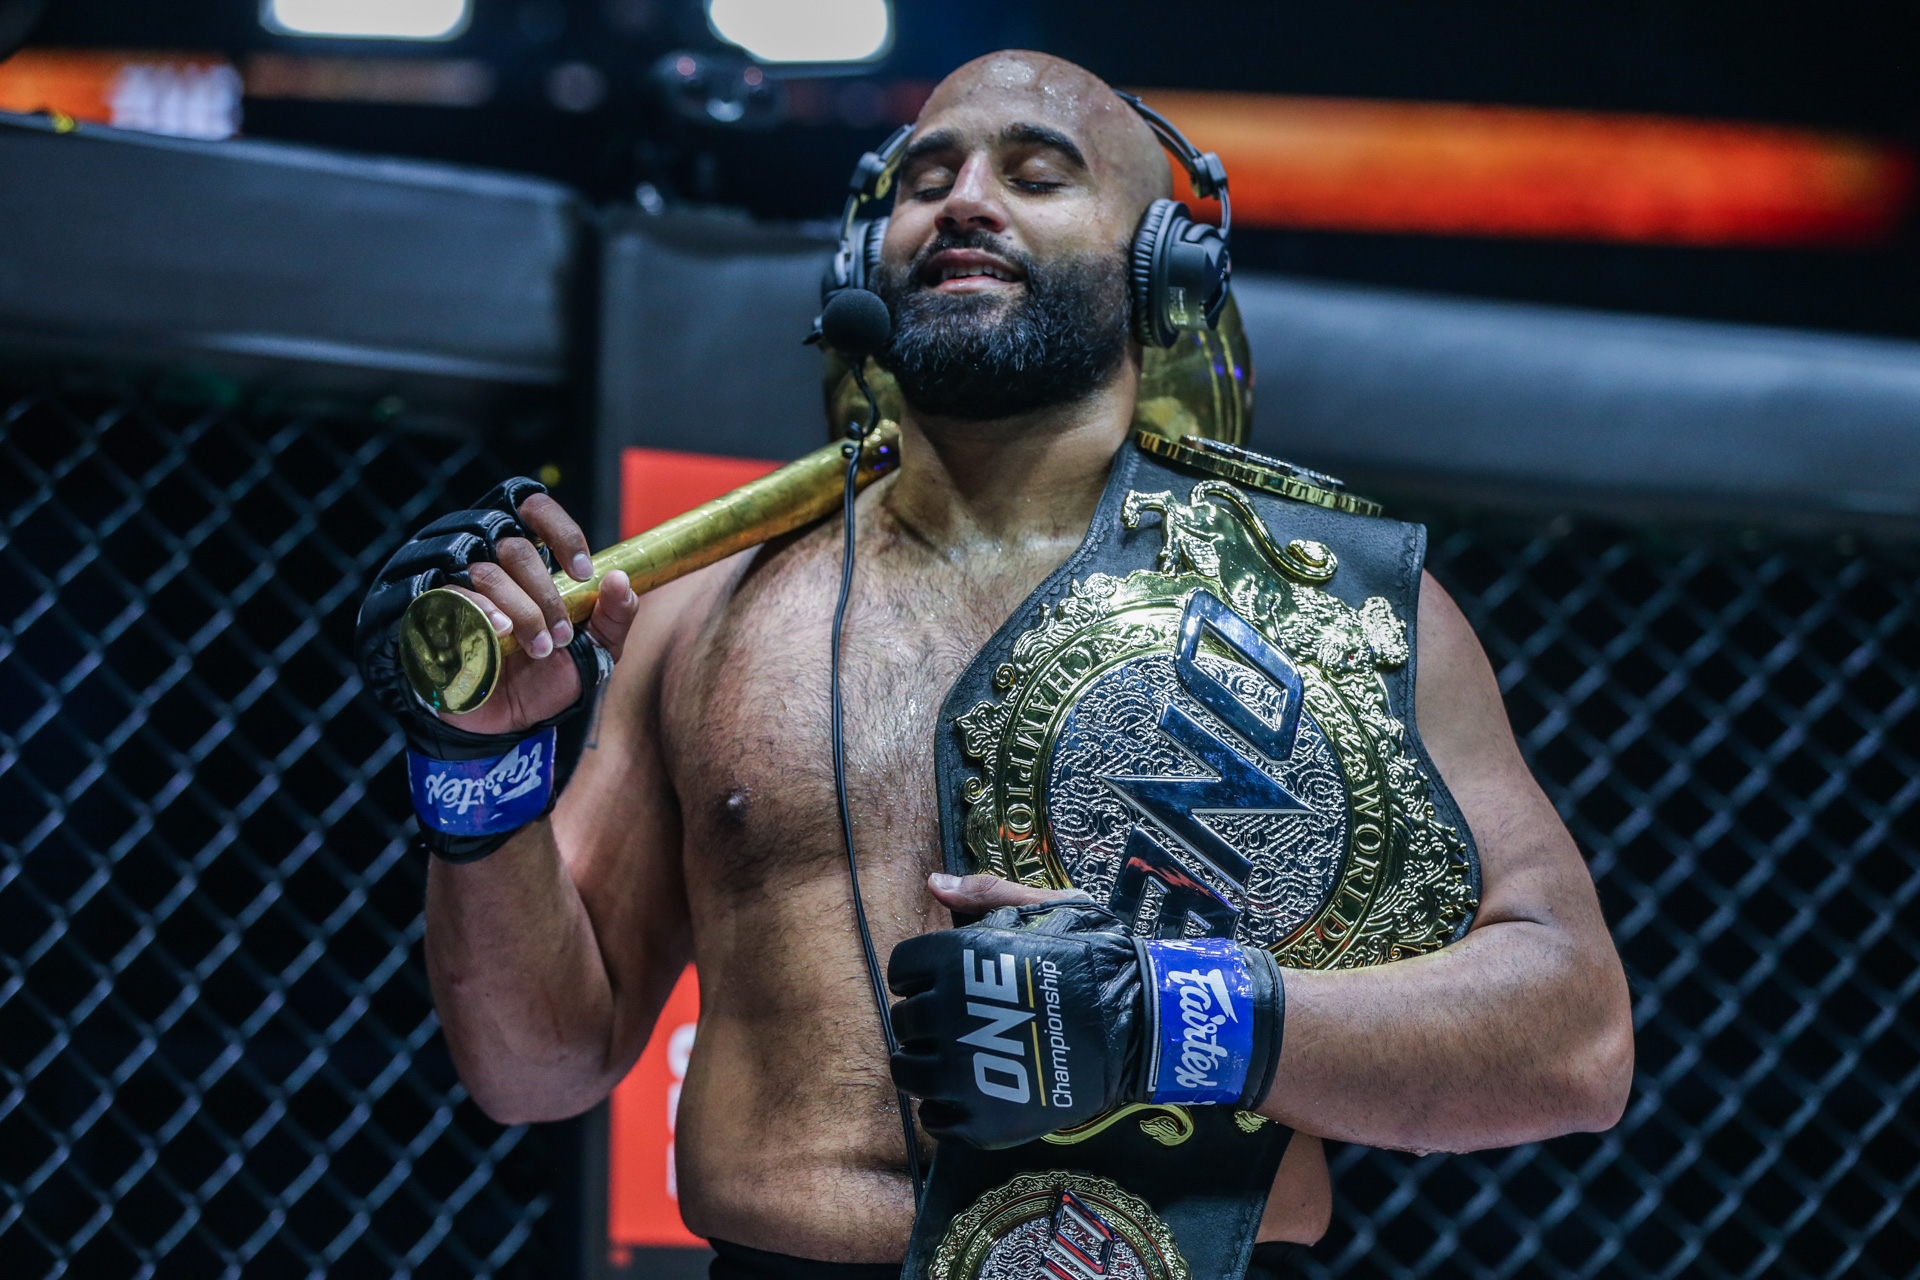 ONE Heavyweight Champion Bhullar Takes On Malykhin On June 23 But Has Sights Set On Mega Fight With Ngannou